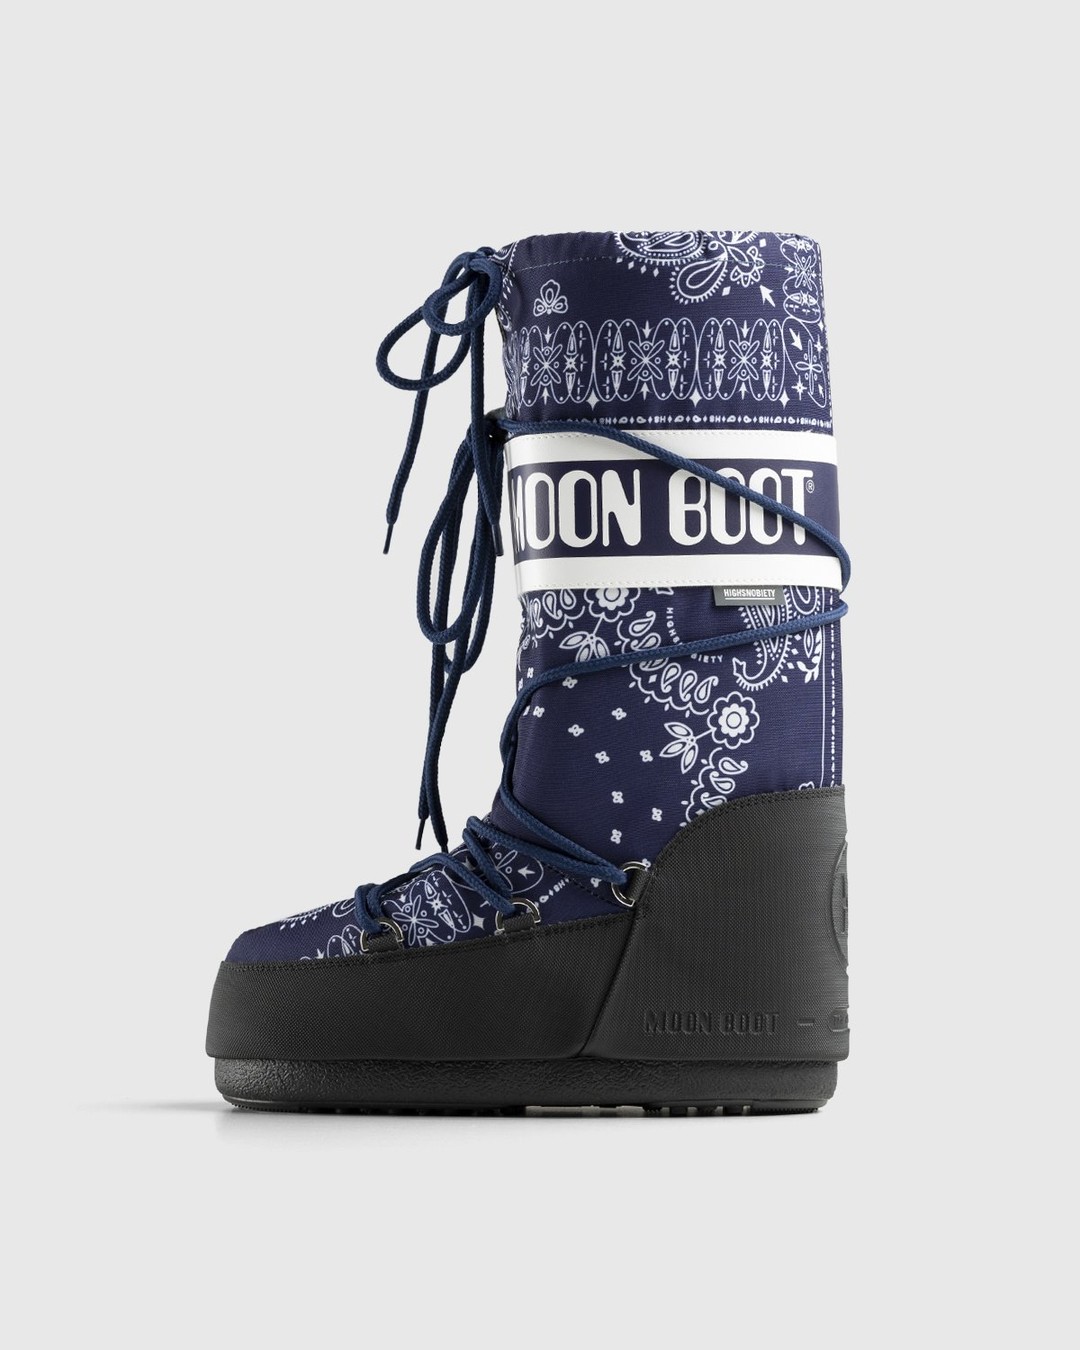 Moon Boot x Highsnobiety – Icon Boot Bandana Blue - Lined Boots - Blue - Image 2